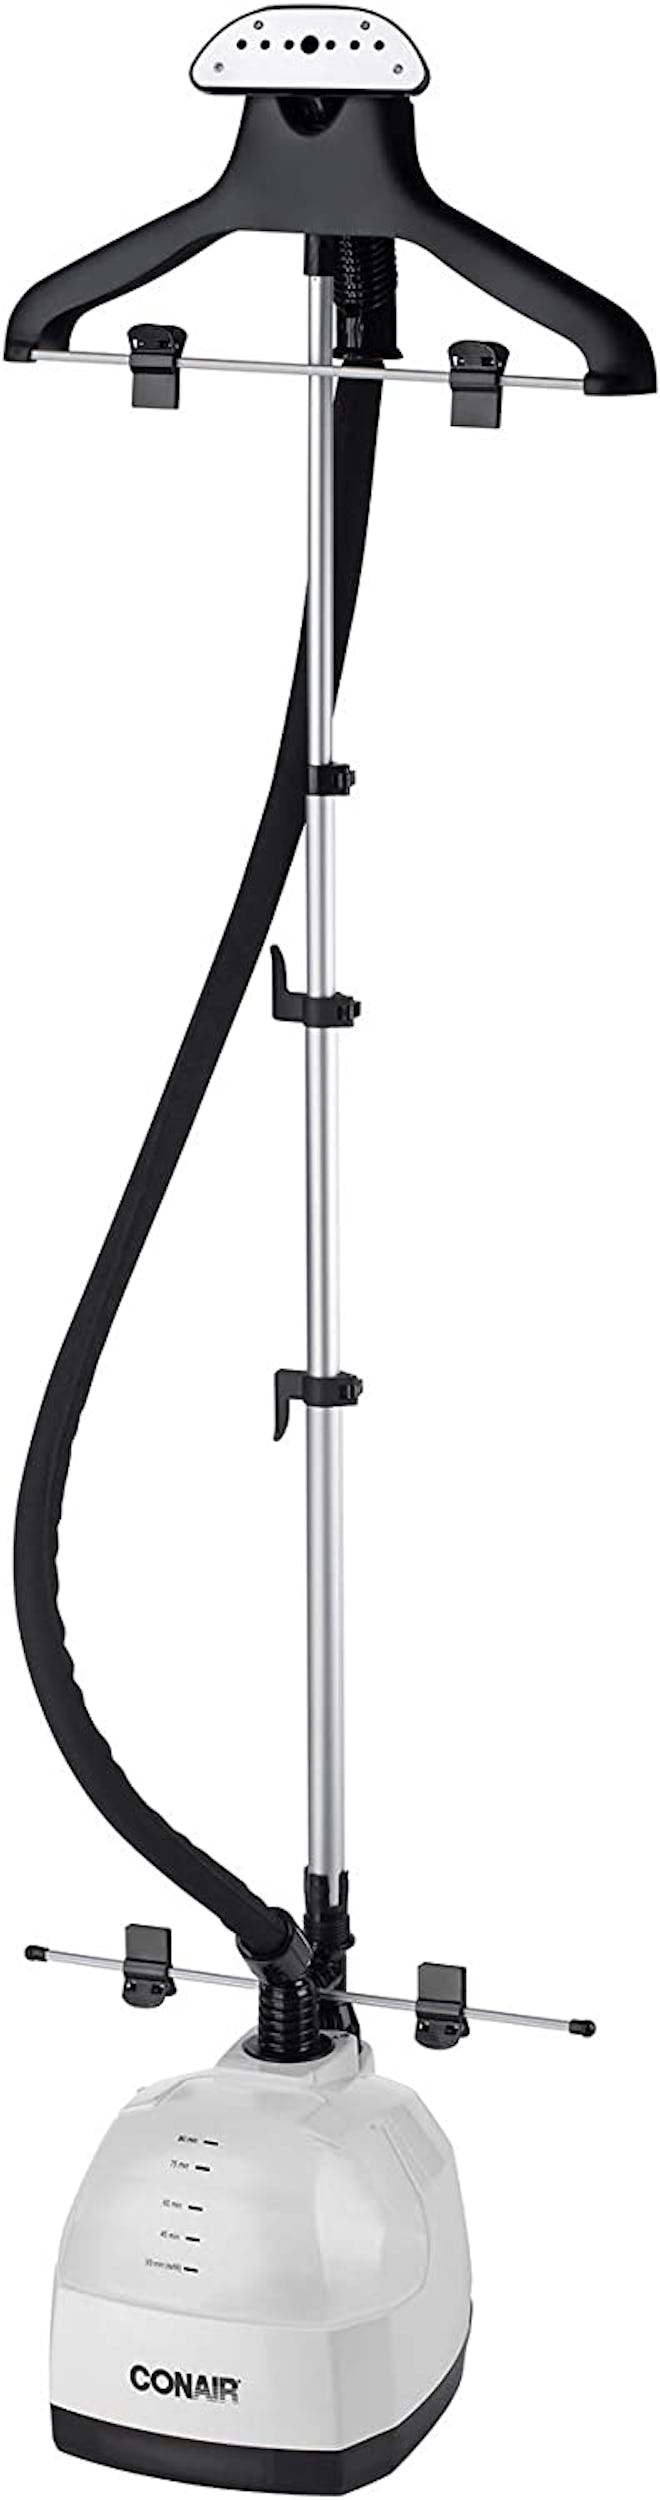 With an extra-large water tank and adjustable pole, this standing Conair model is one of the best st...